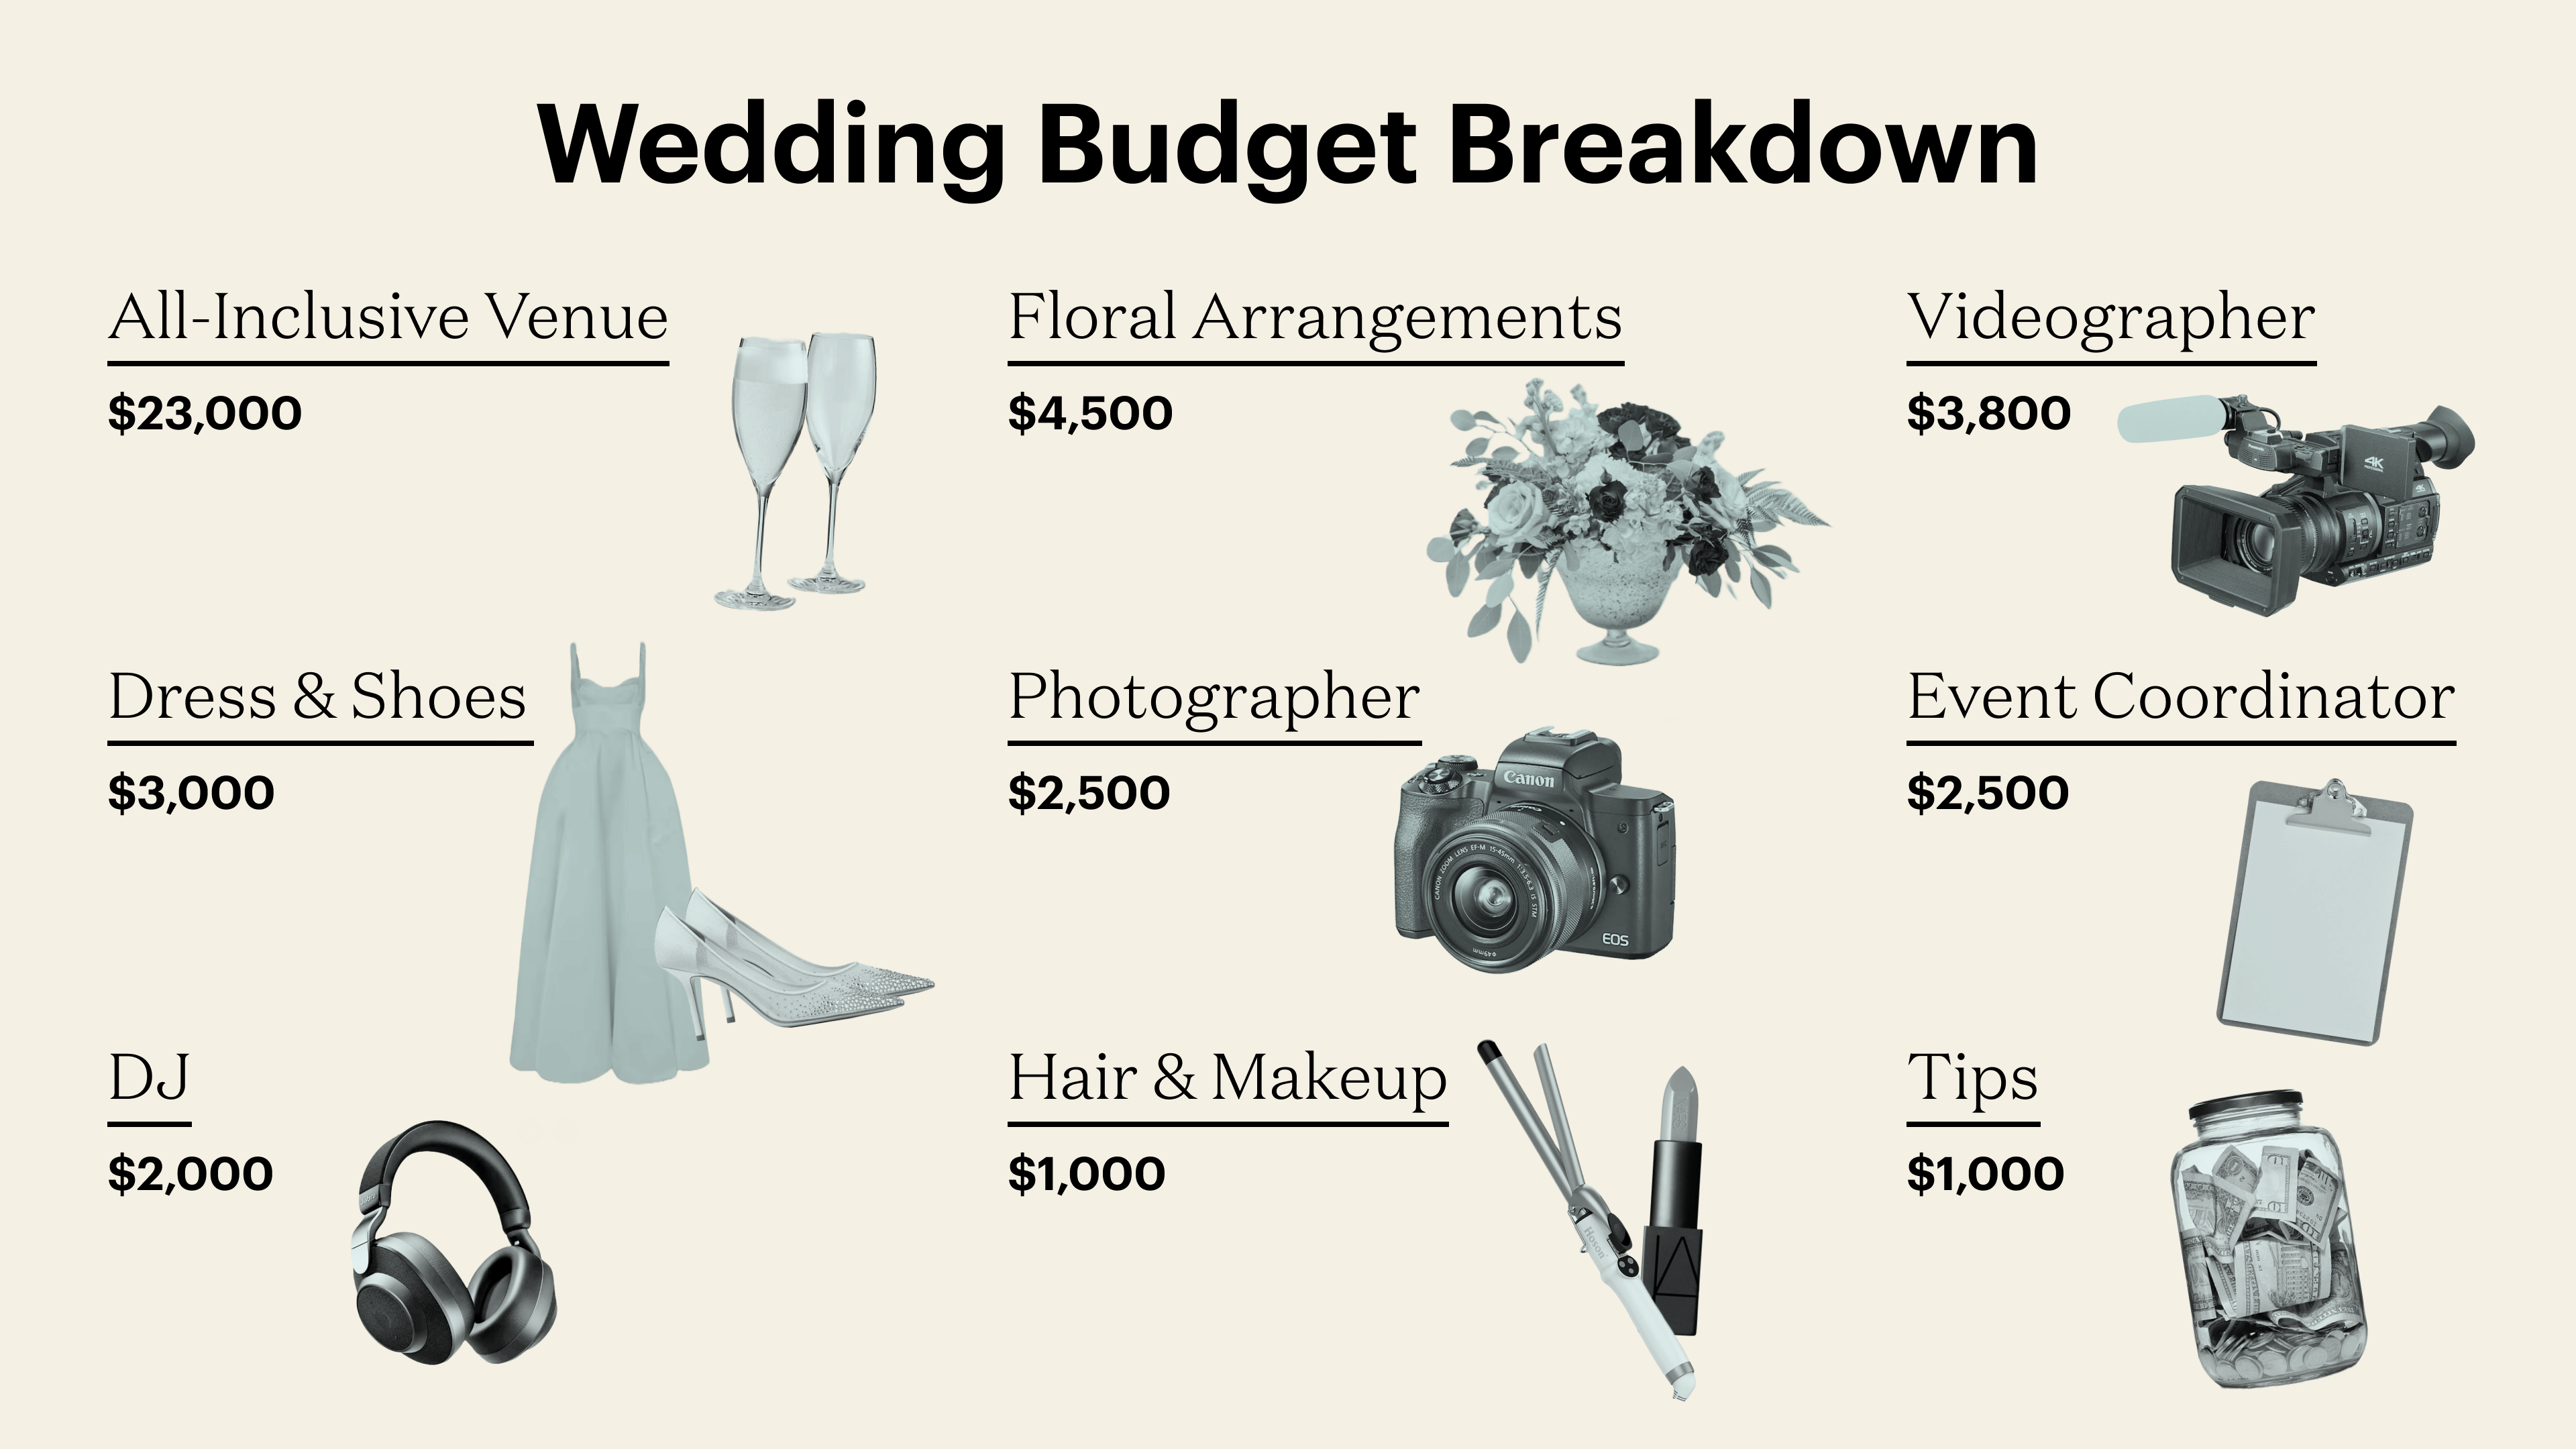 Accessibility, images of wedding essentials and prices